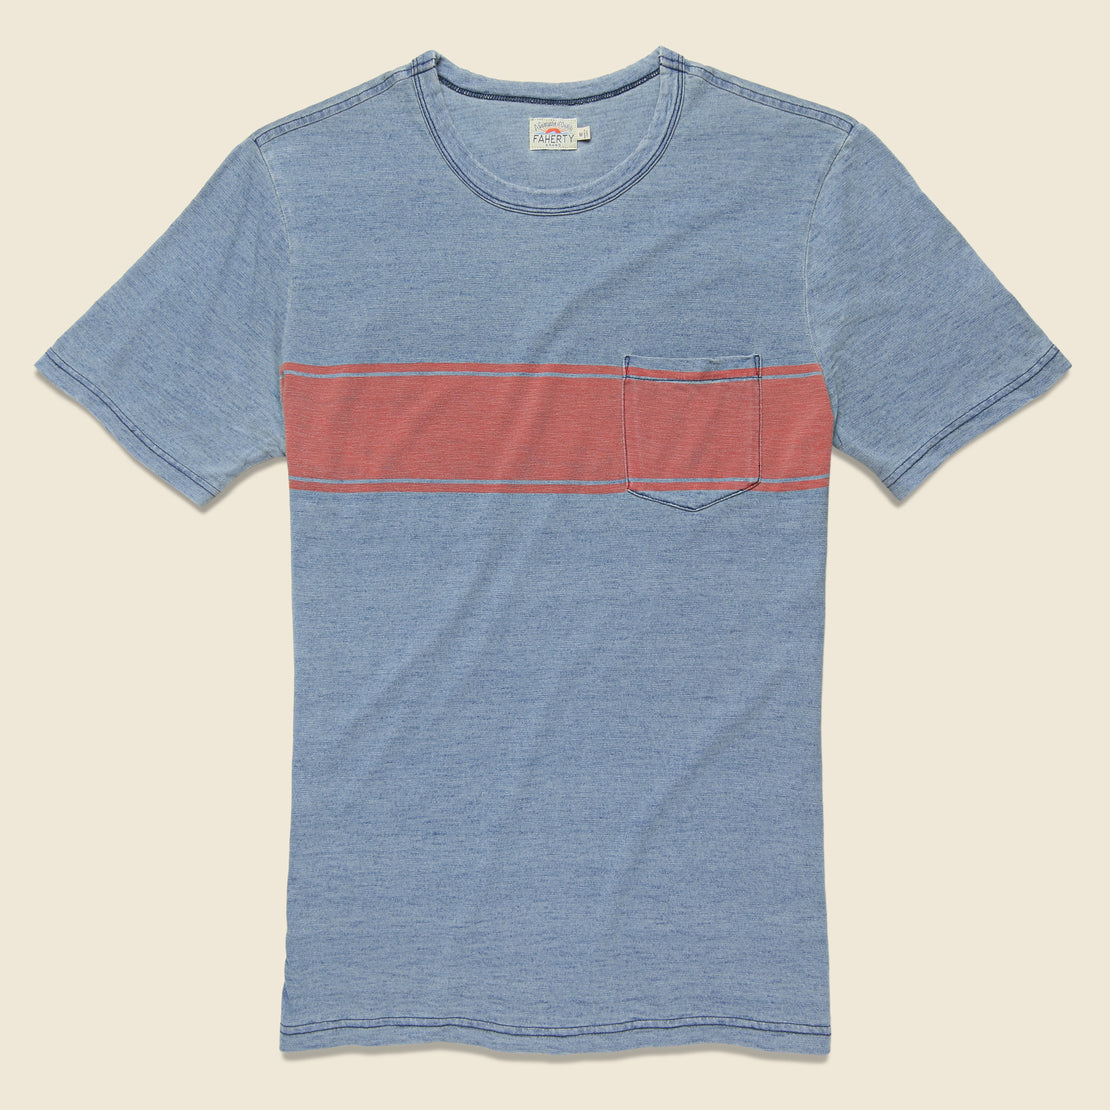 Faherty Surf Stripe Pocket Tee - Blue/Red